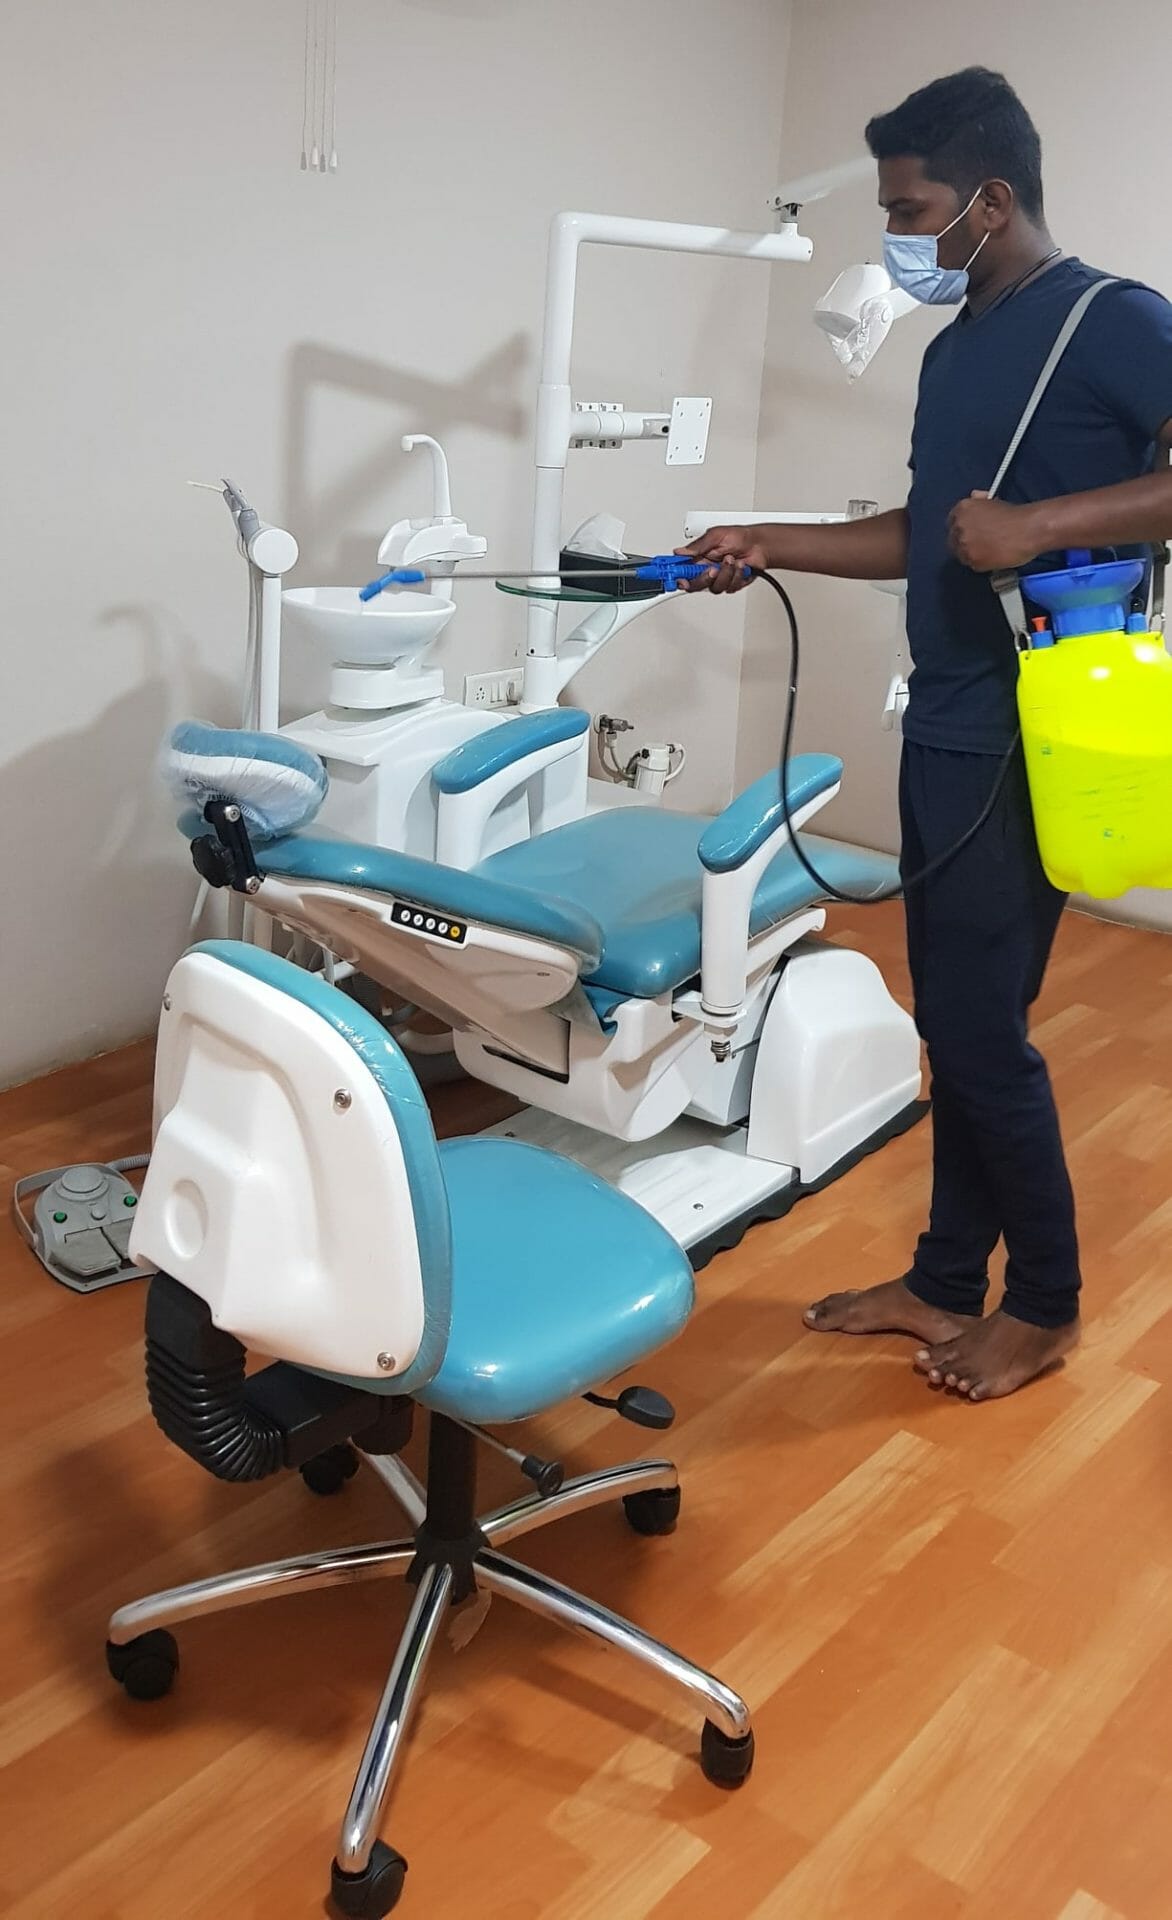 A sanitation worker cleaning dental equipment in the 4Squares dental clinic in medavakkam